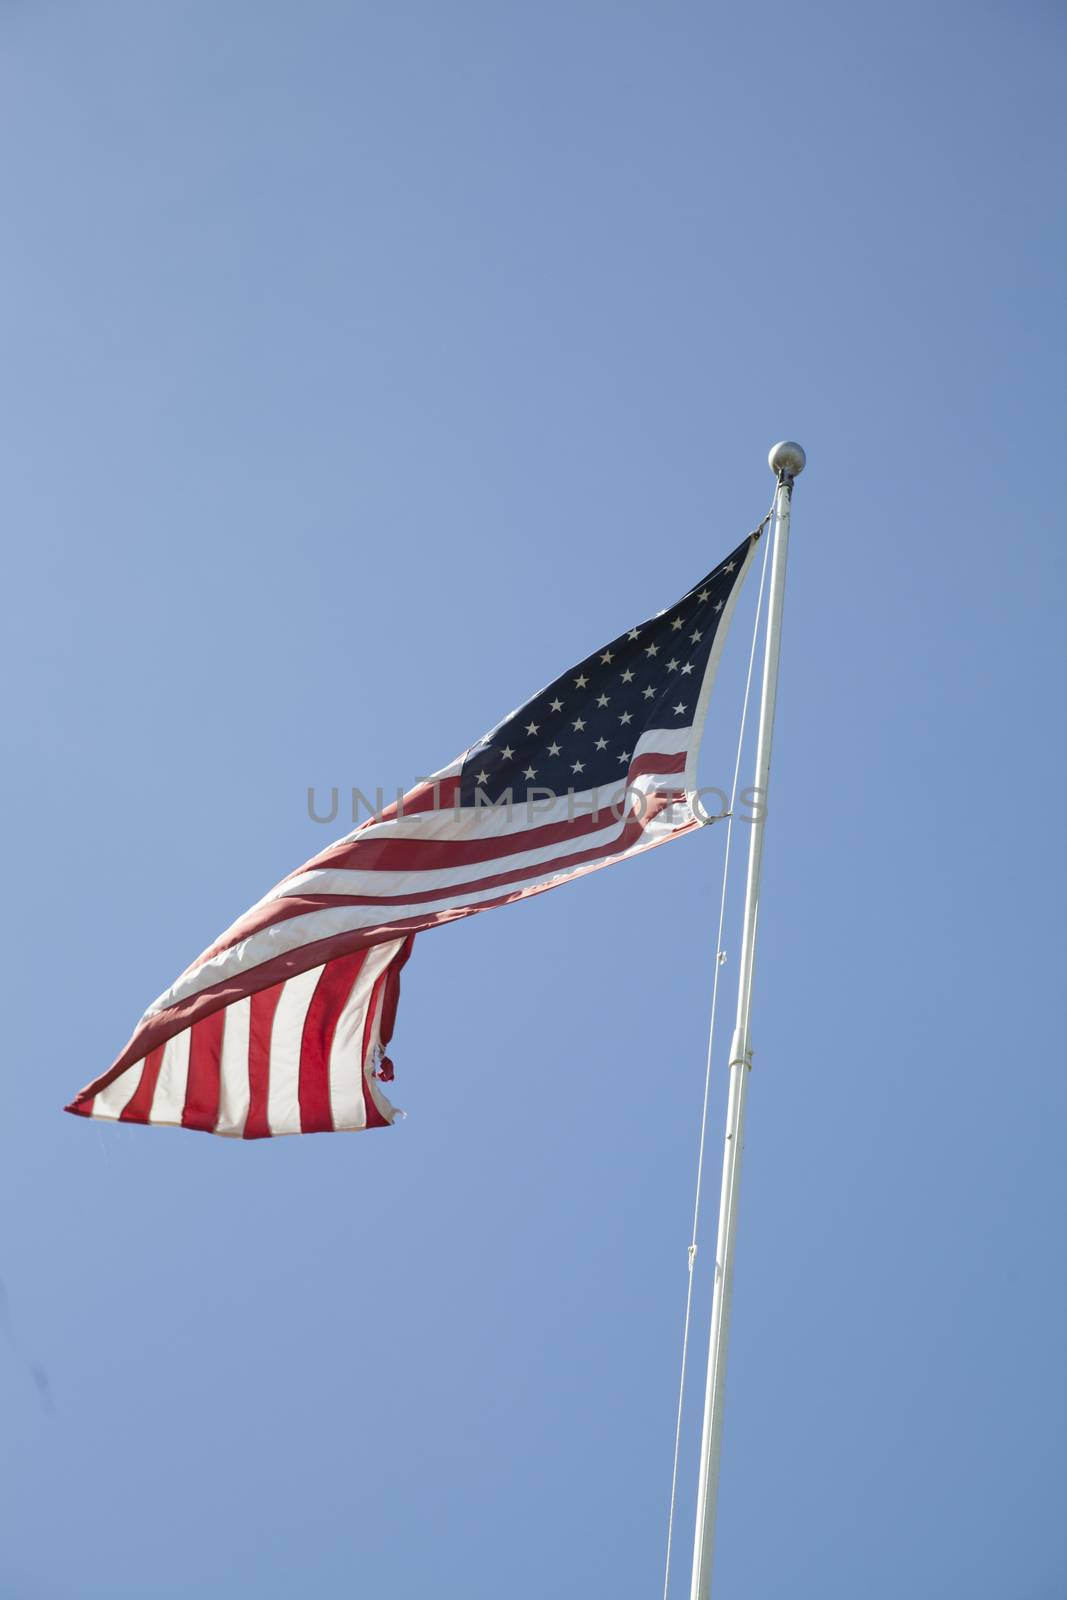 American flag flapping against a beautiful blue background